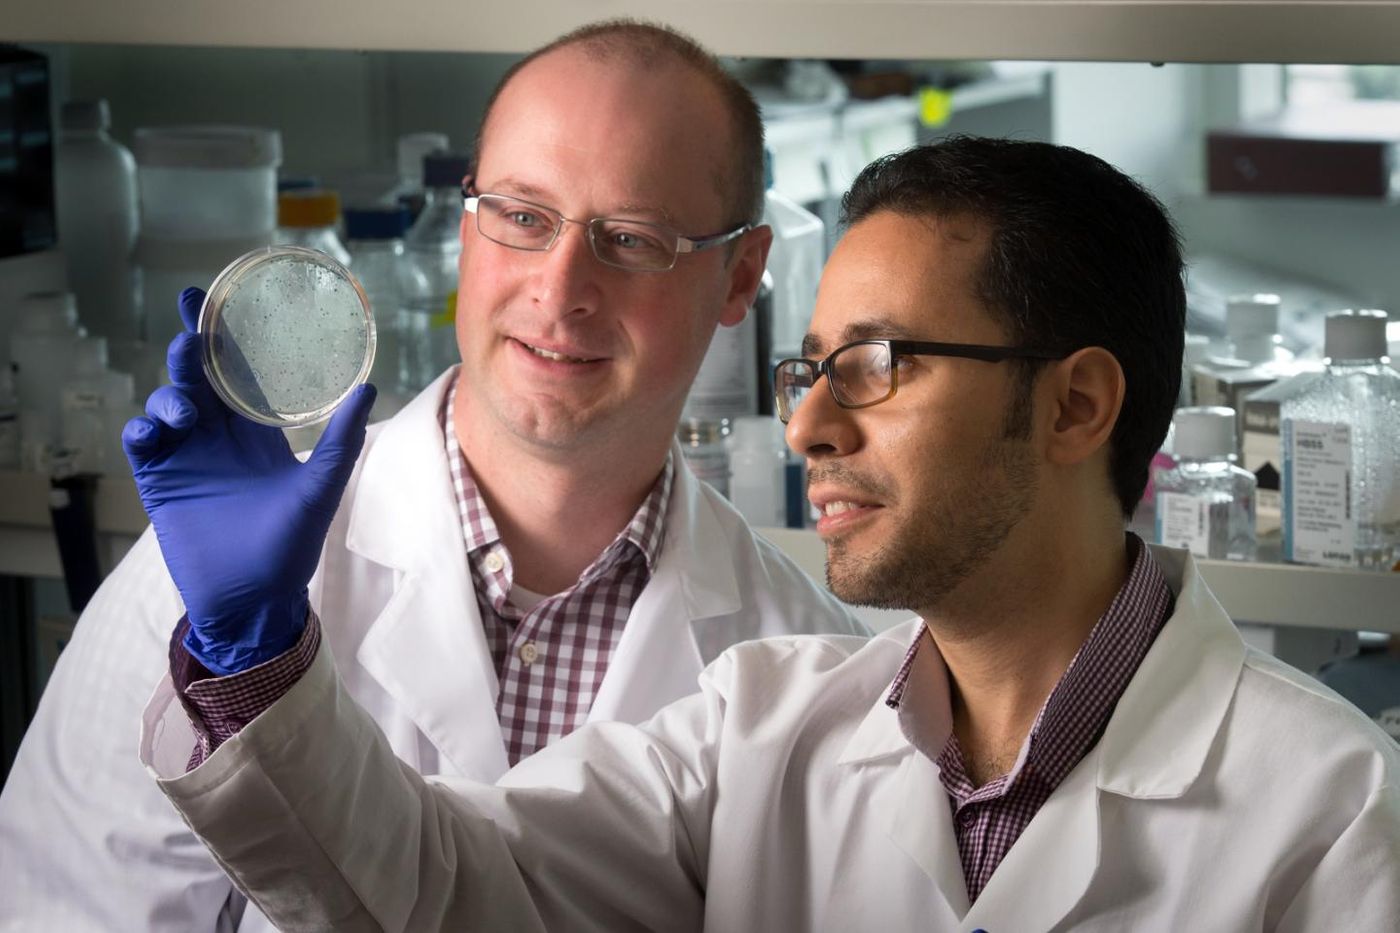 Ben Youngblood, Ph.D., pictured with Hazem Ghoneim, Ph.D., and colleagues showed how memory CD8 T cells arise from a small subset of effector CD8 T cells in laboratory models. Credit: Seth Dixon/St. Jude Children's Research Hospital